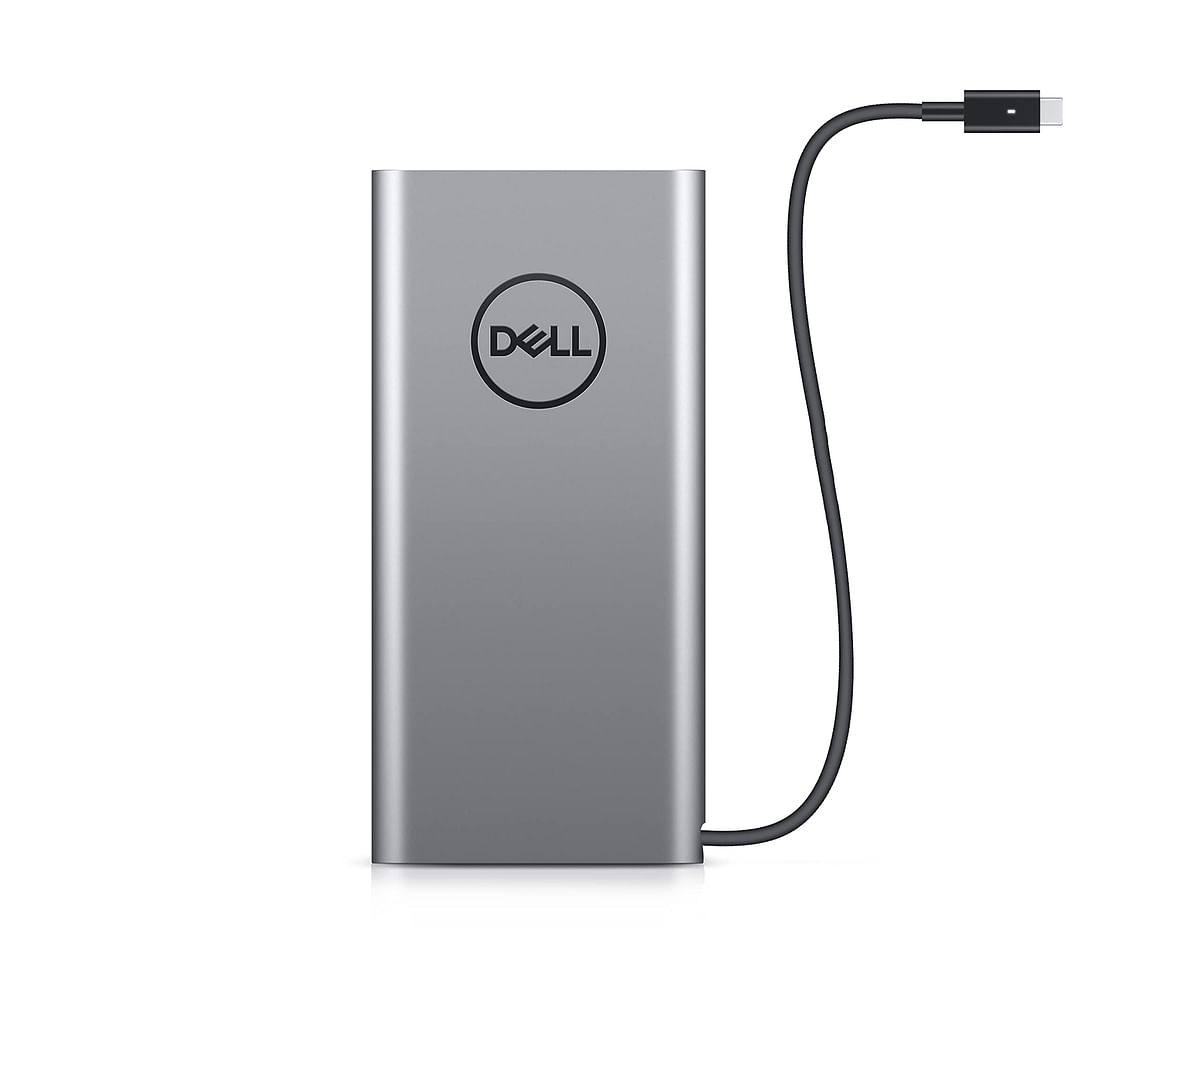 Dell - 65W USB-C Notebook Power Bank Plus for most Type-C laptops and most USB-A devices - PW7018LC - Silver